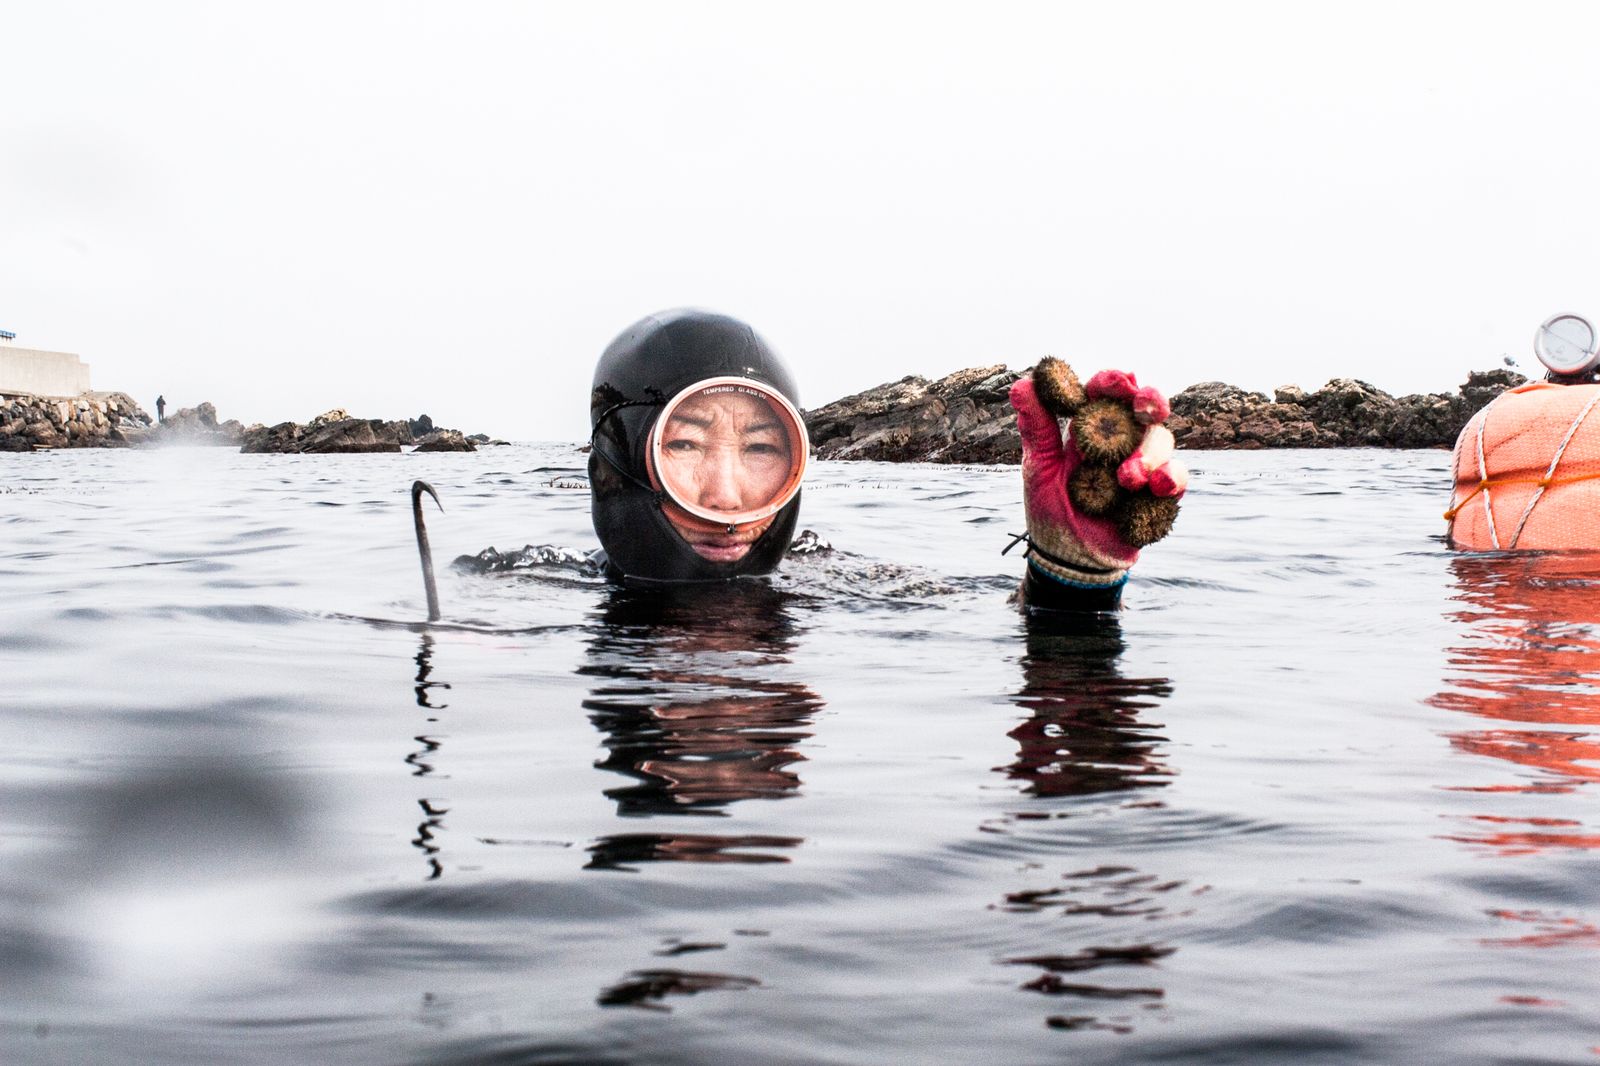 © Mijoo Kim - Image from the The Mother of the sea photography project